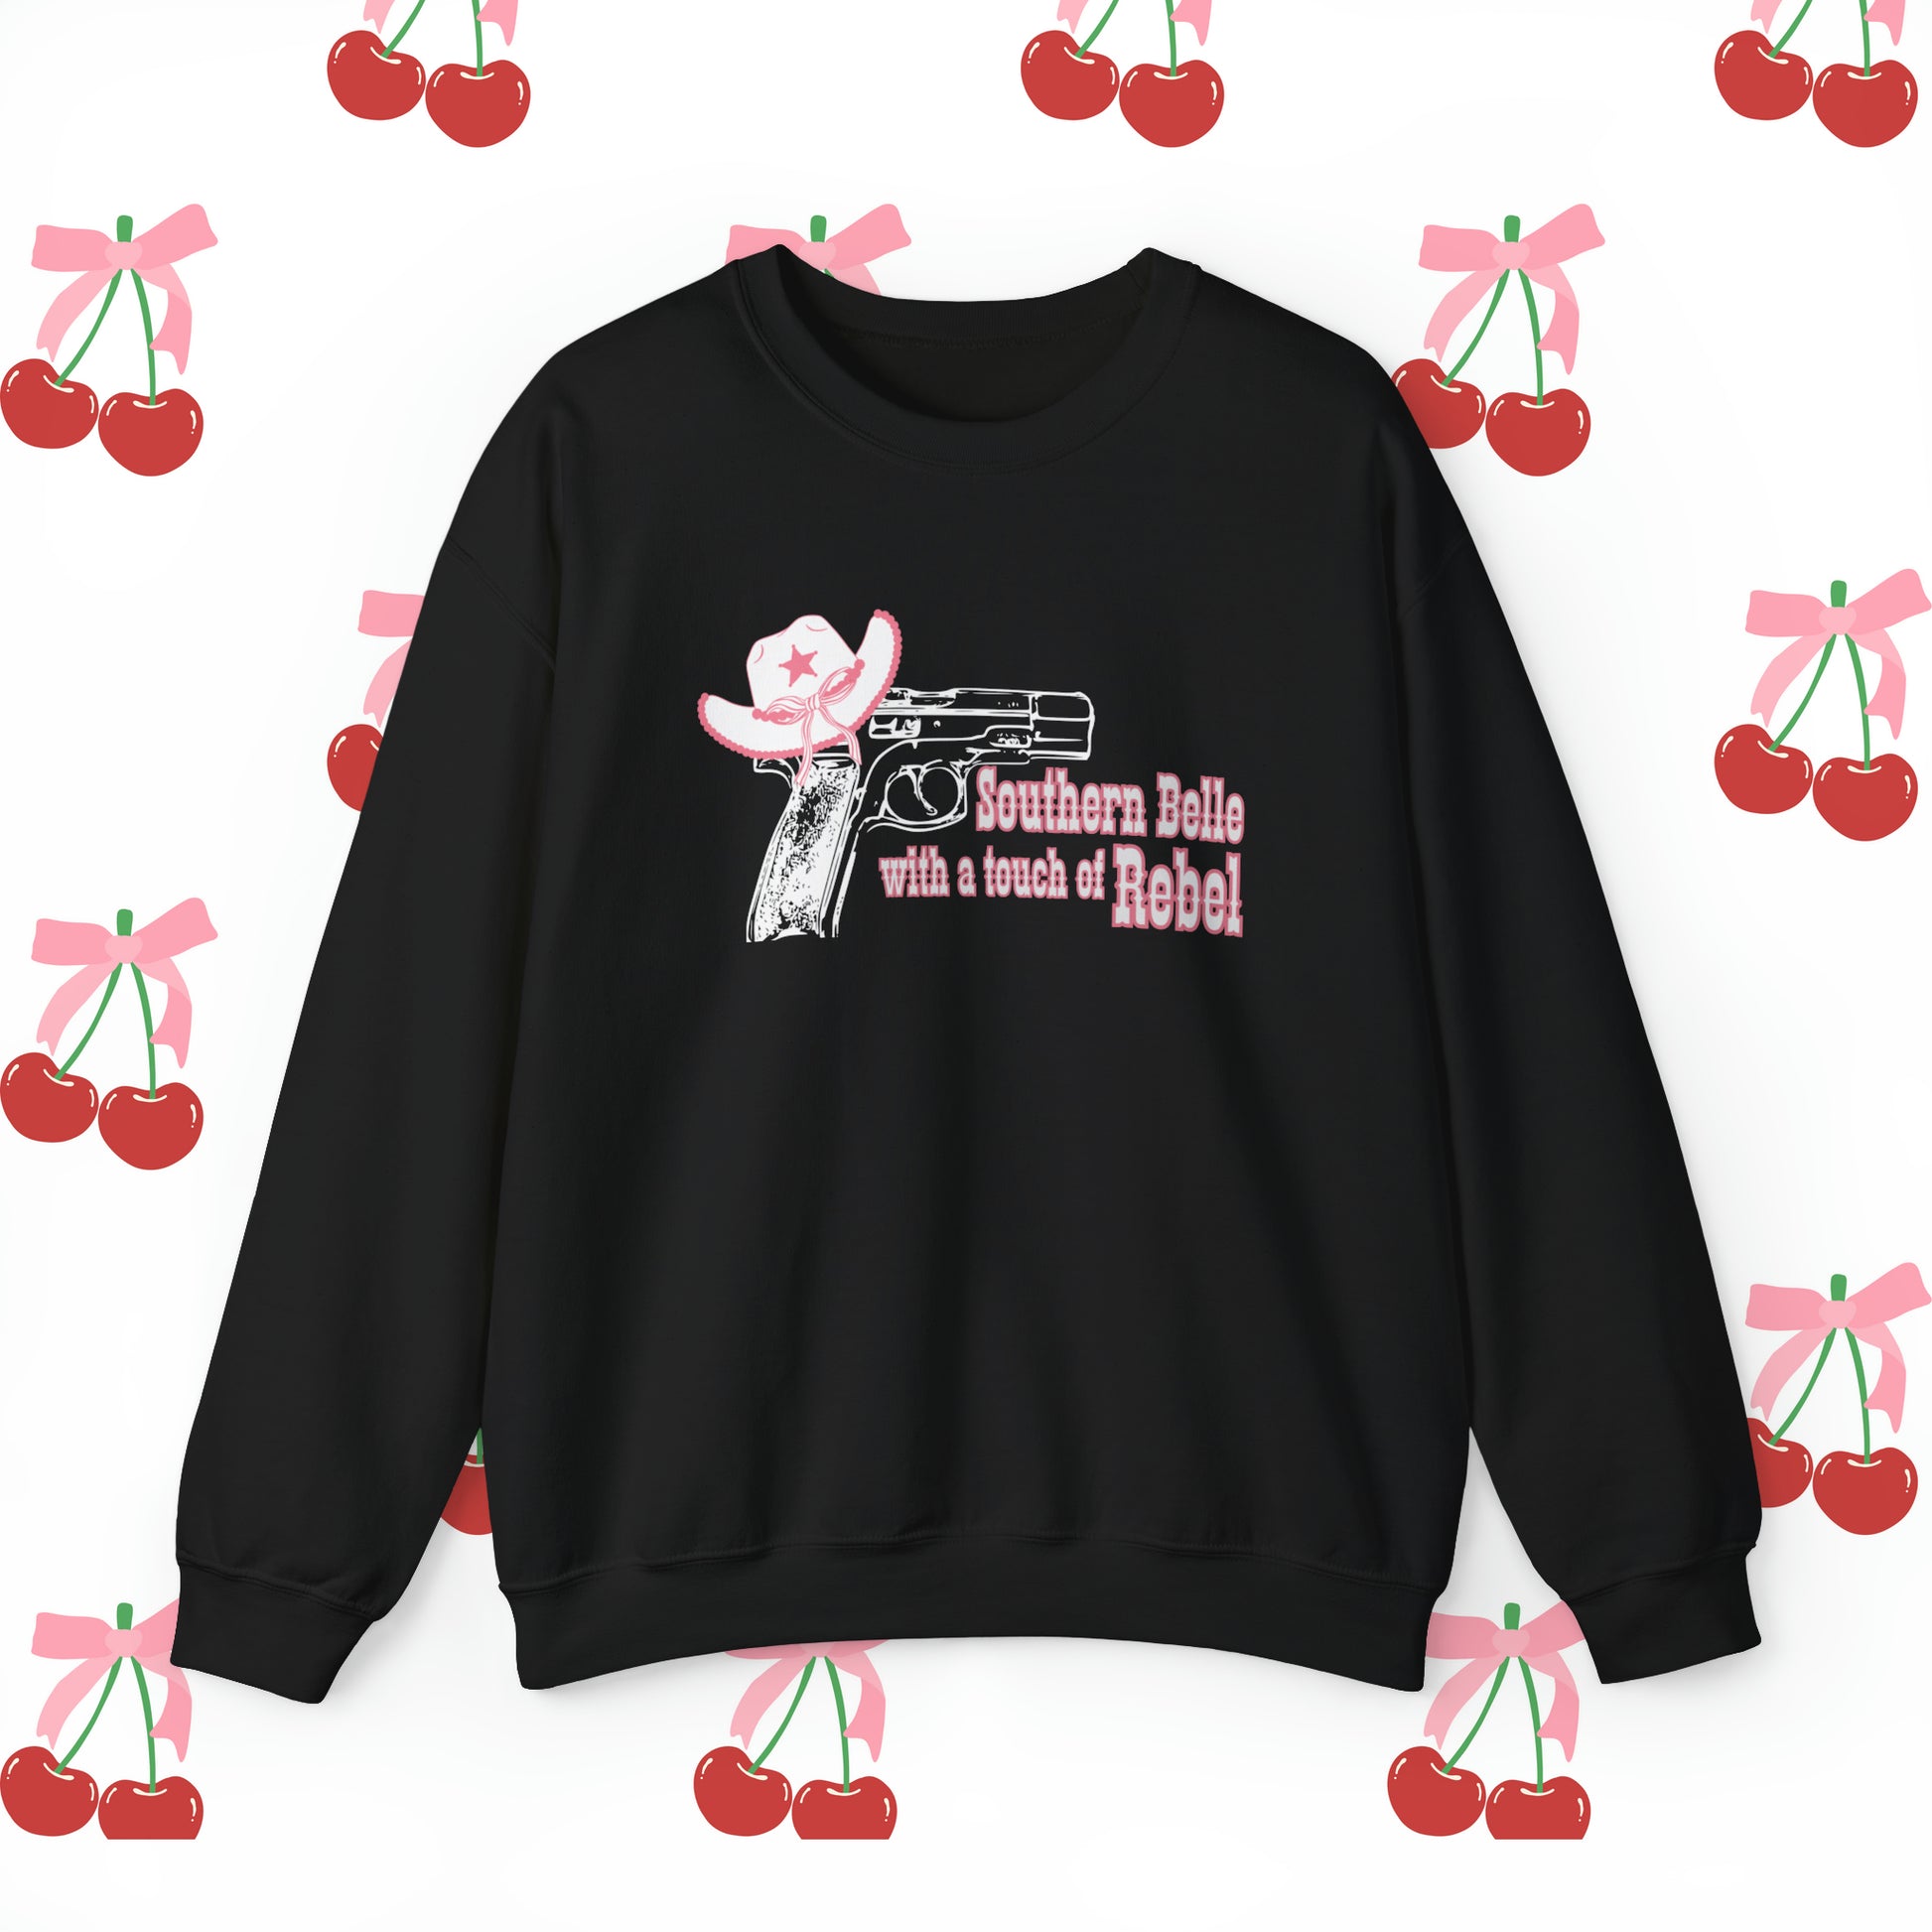 Southern Belle With A Touch Of Rebel Crewneck Sweatshirt Black